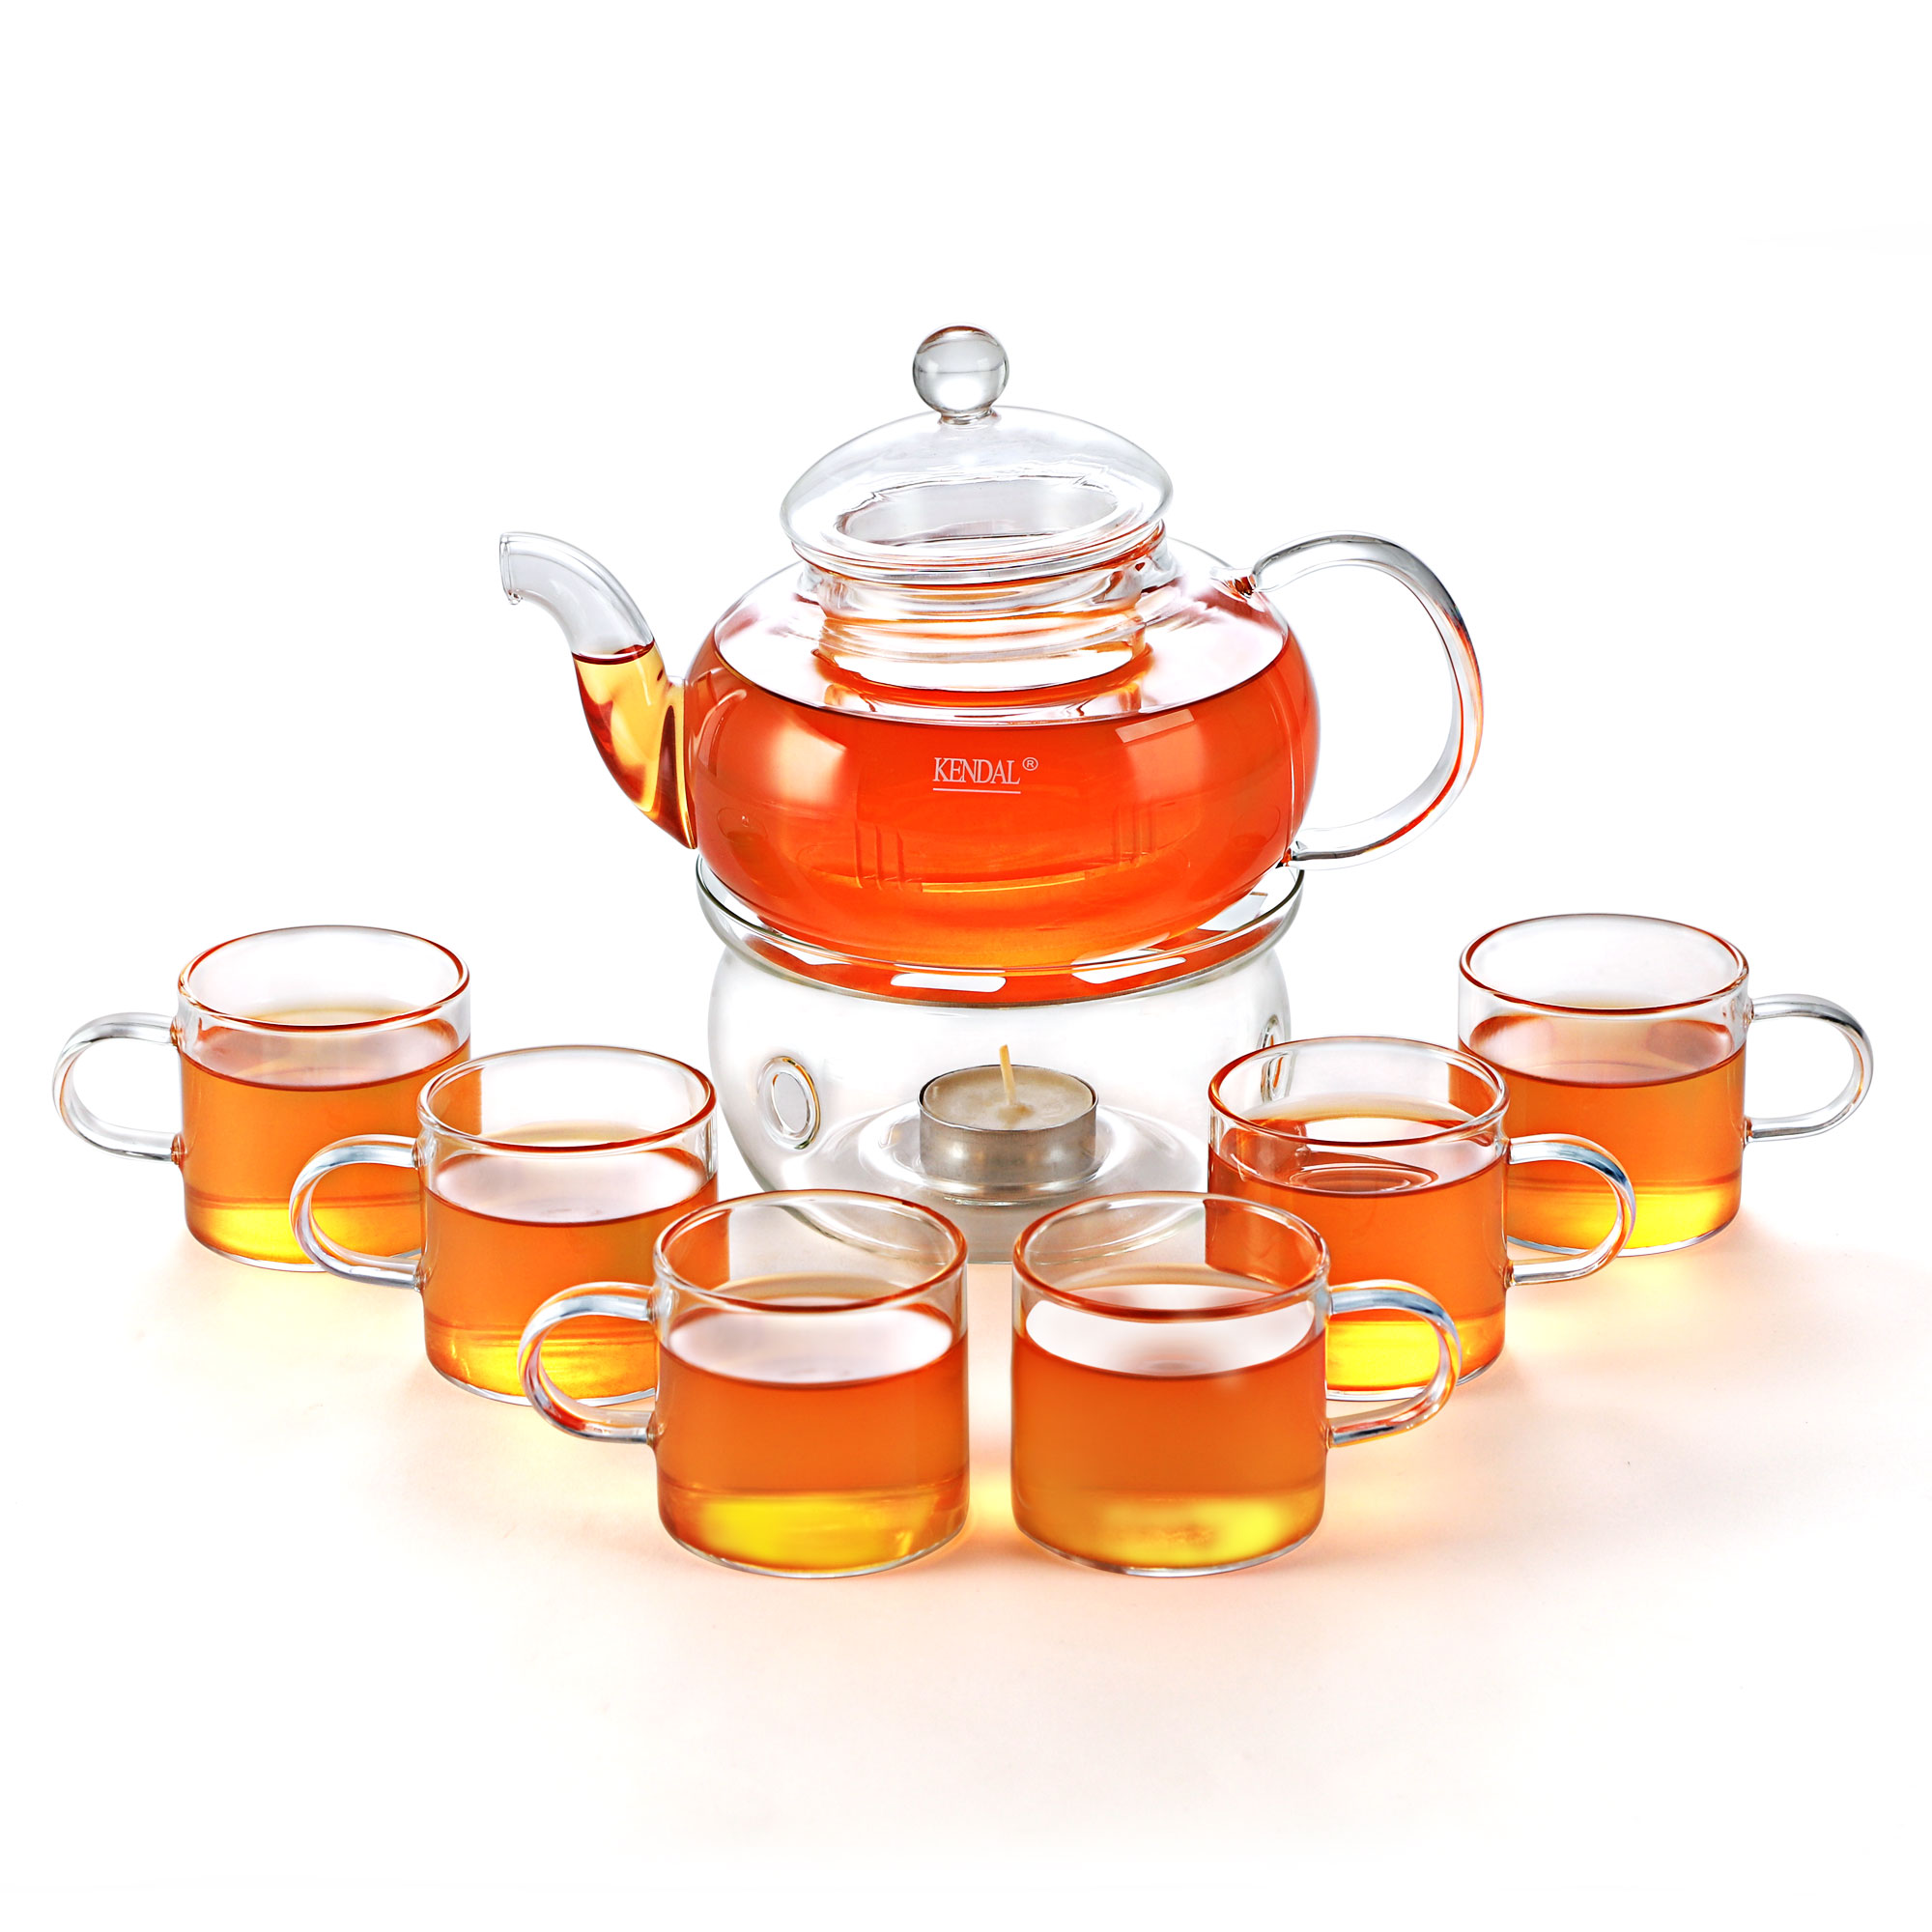 27 oz glass filtering tea maker teapot with a warmer and 6 tea cups CJ-BS808A - image 1 of 8